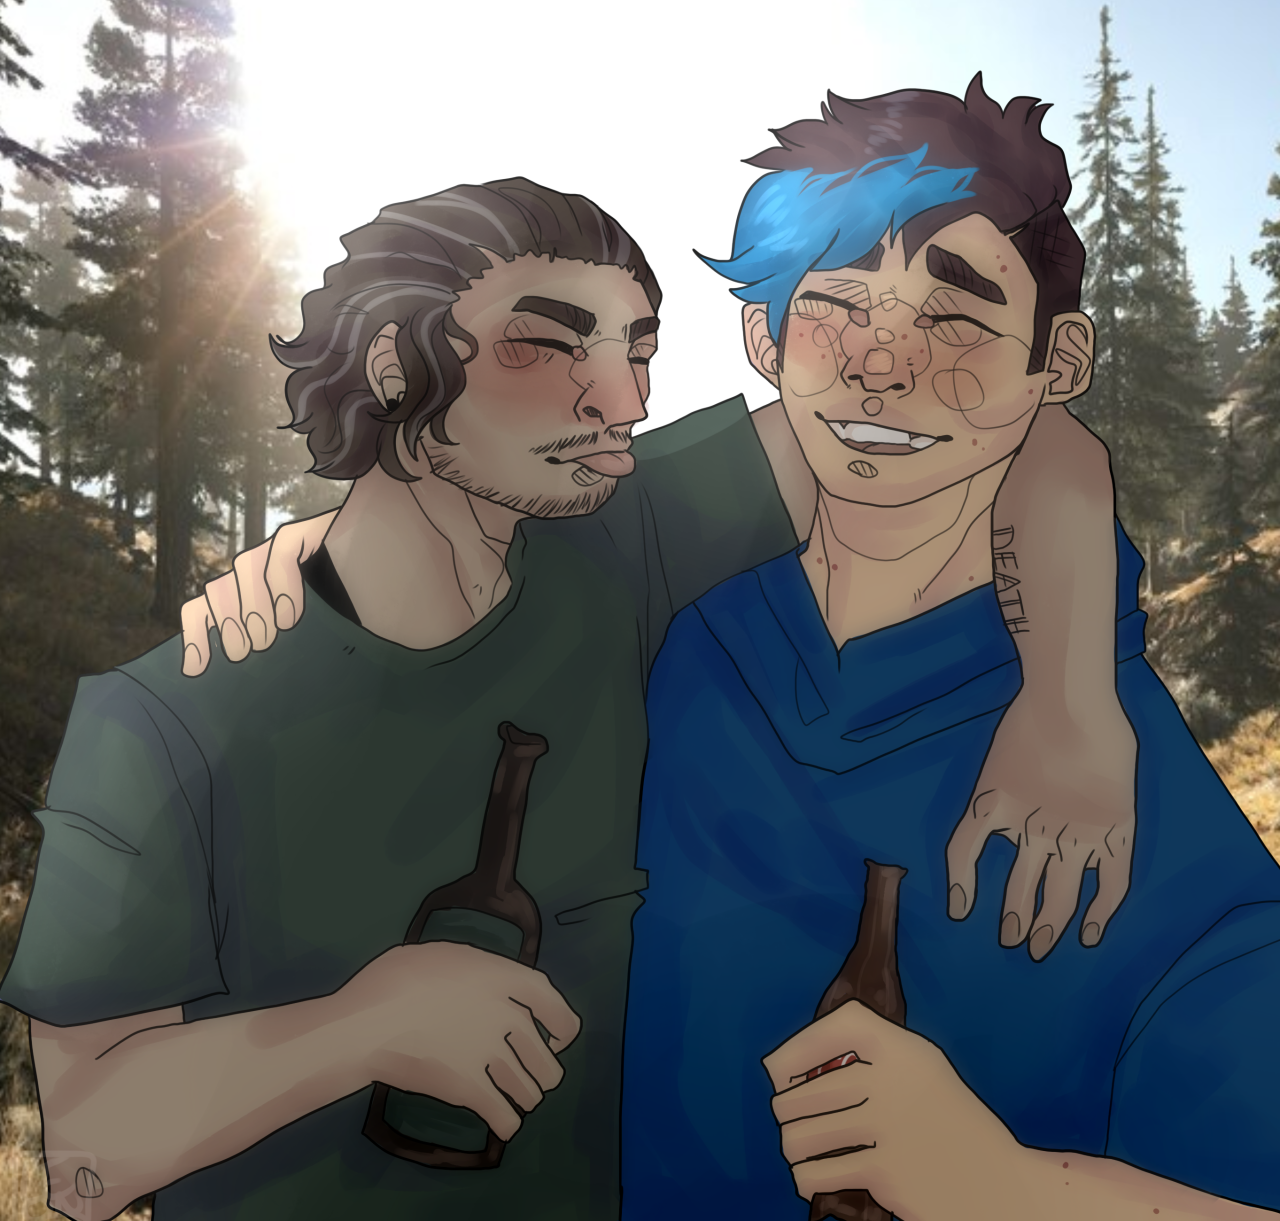 ft @juniors0possum s OC Lukasz. Caleb is just the gay beer uncle and you can’t stop me lol #he s also short as fuck and old  #gerblin gremlin man #myart#artist#art#artwork#caleb jesperson#lukasz seed #far cry 5 #hope county#lukasz#friends oc#friend oc #caleb is a gay uncle #lol